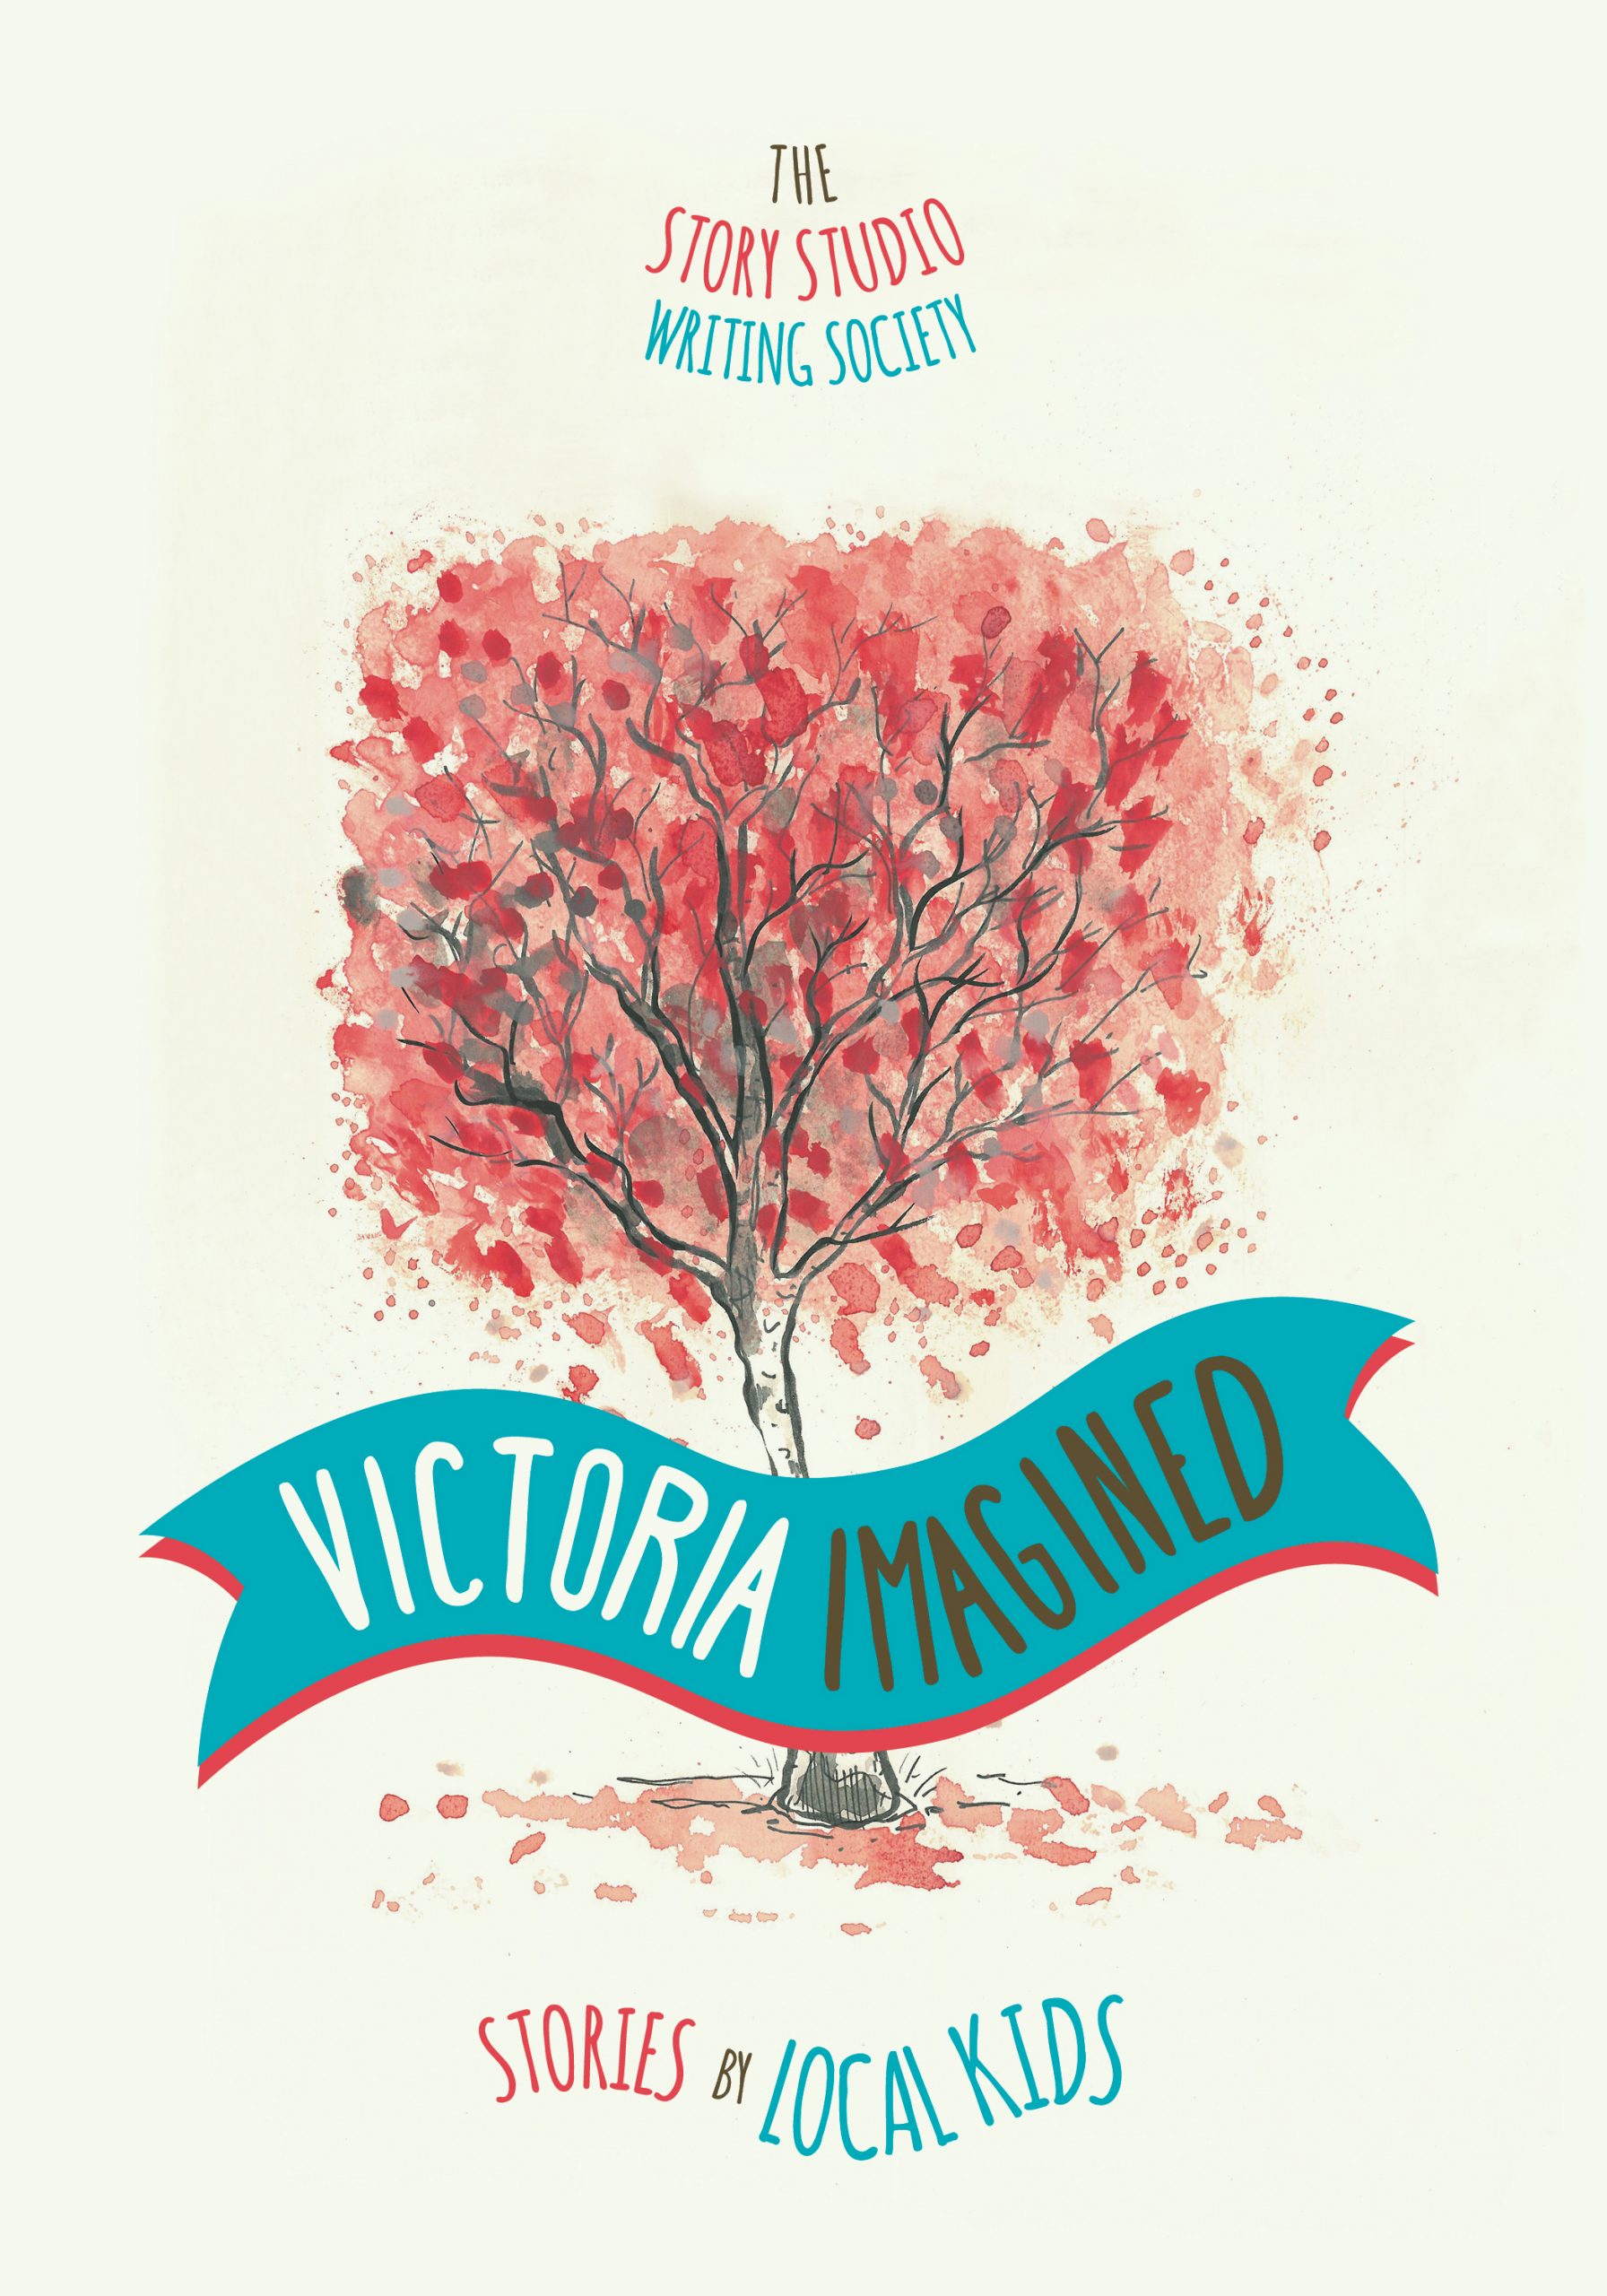 Victoria Imagined: Stories by Local Kids (2015)